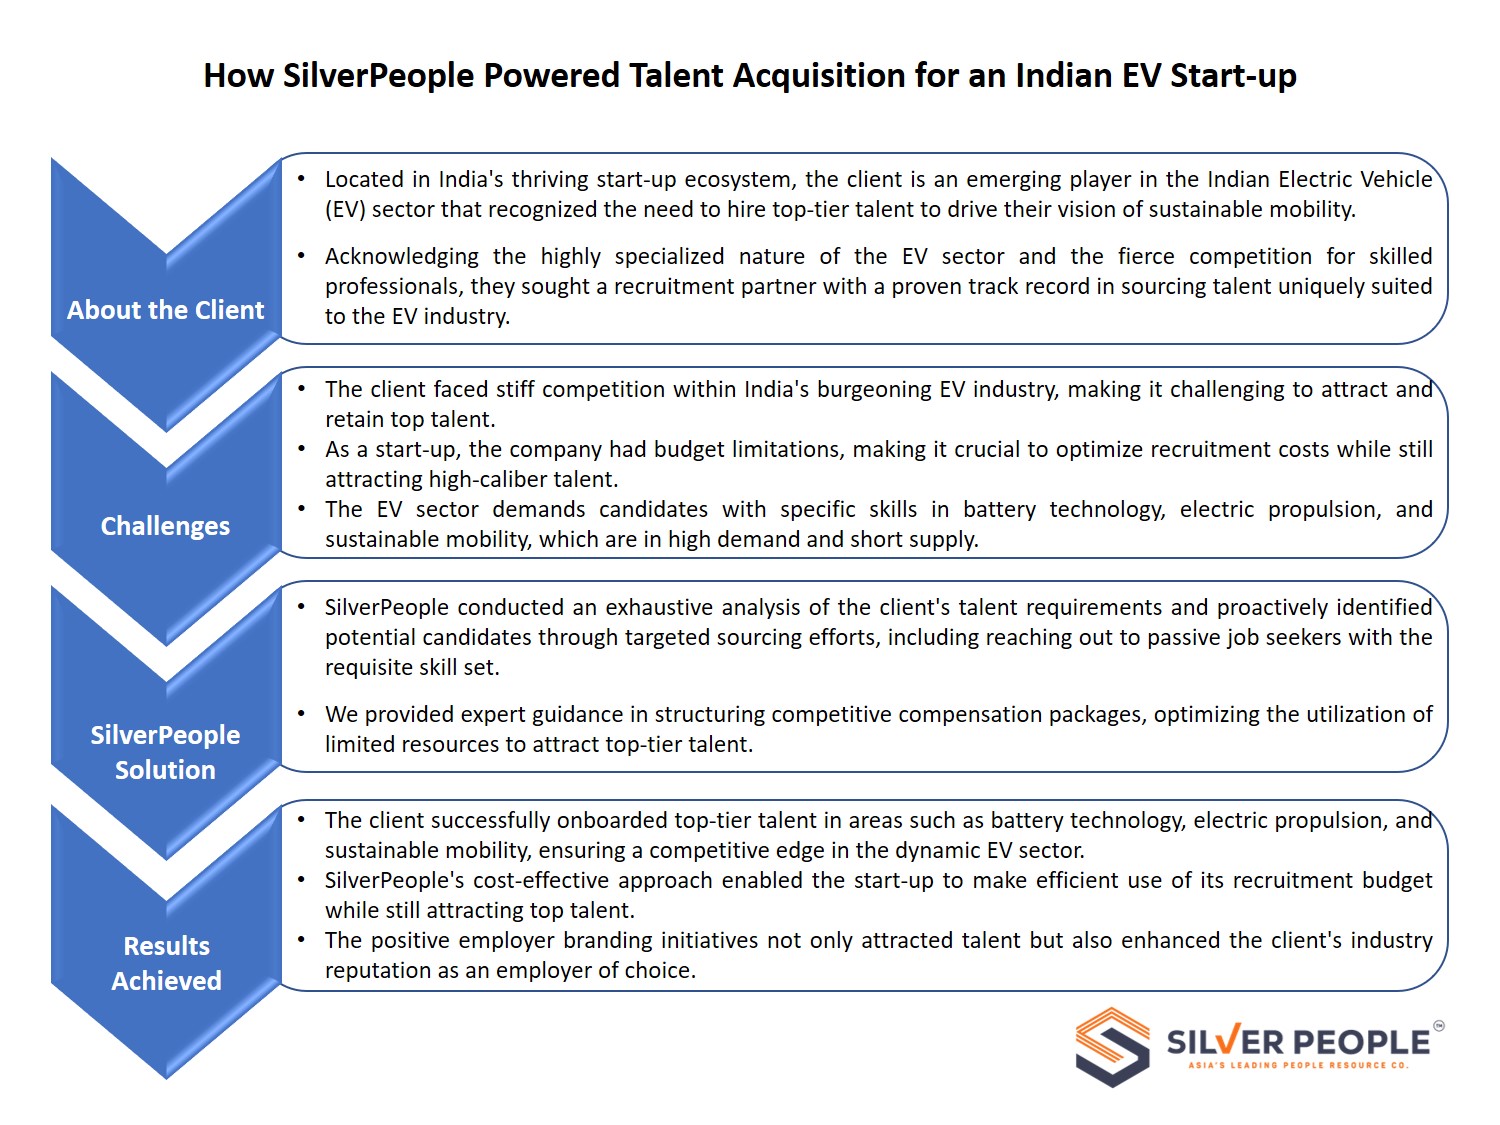 How SilverPeople Powered Talent Acquisition for an Indian EV Start-up